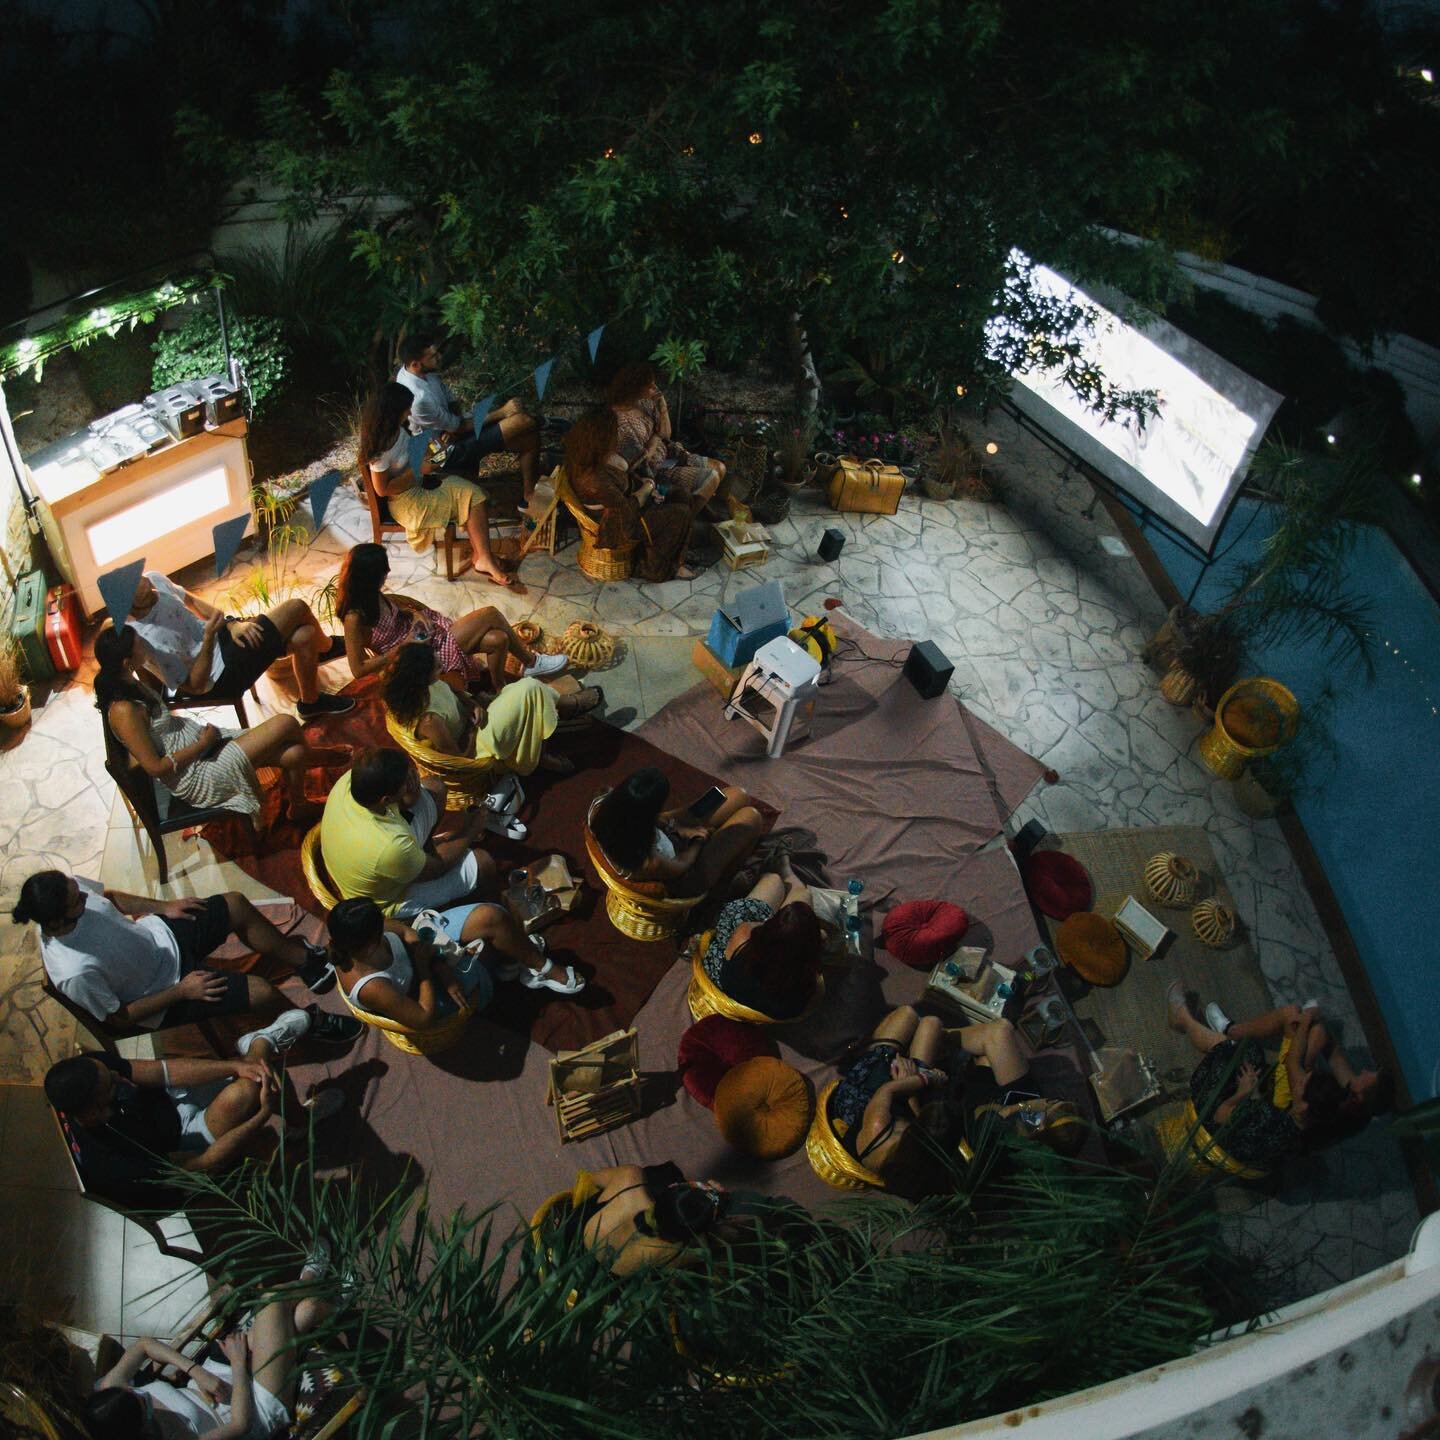 Cinebur from above 🙌

All it takes is a little light 💡 from a movie night 🍿to brighten up a neighborhood&hellip;

Check out some of these Cineburs hosted by locals that all shared a bit of cinema&rsquo;s magic with their community:

1. The Boho Fi